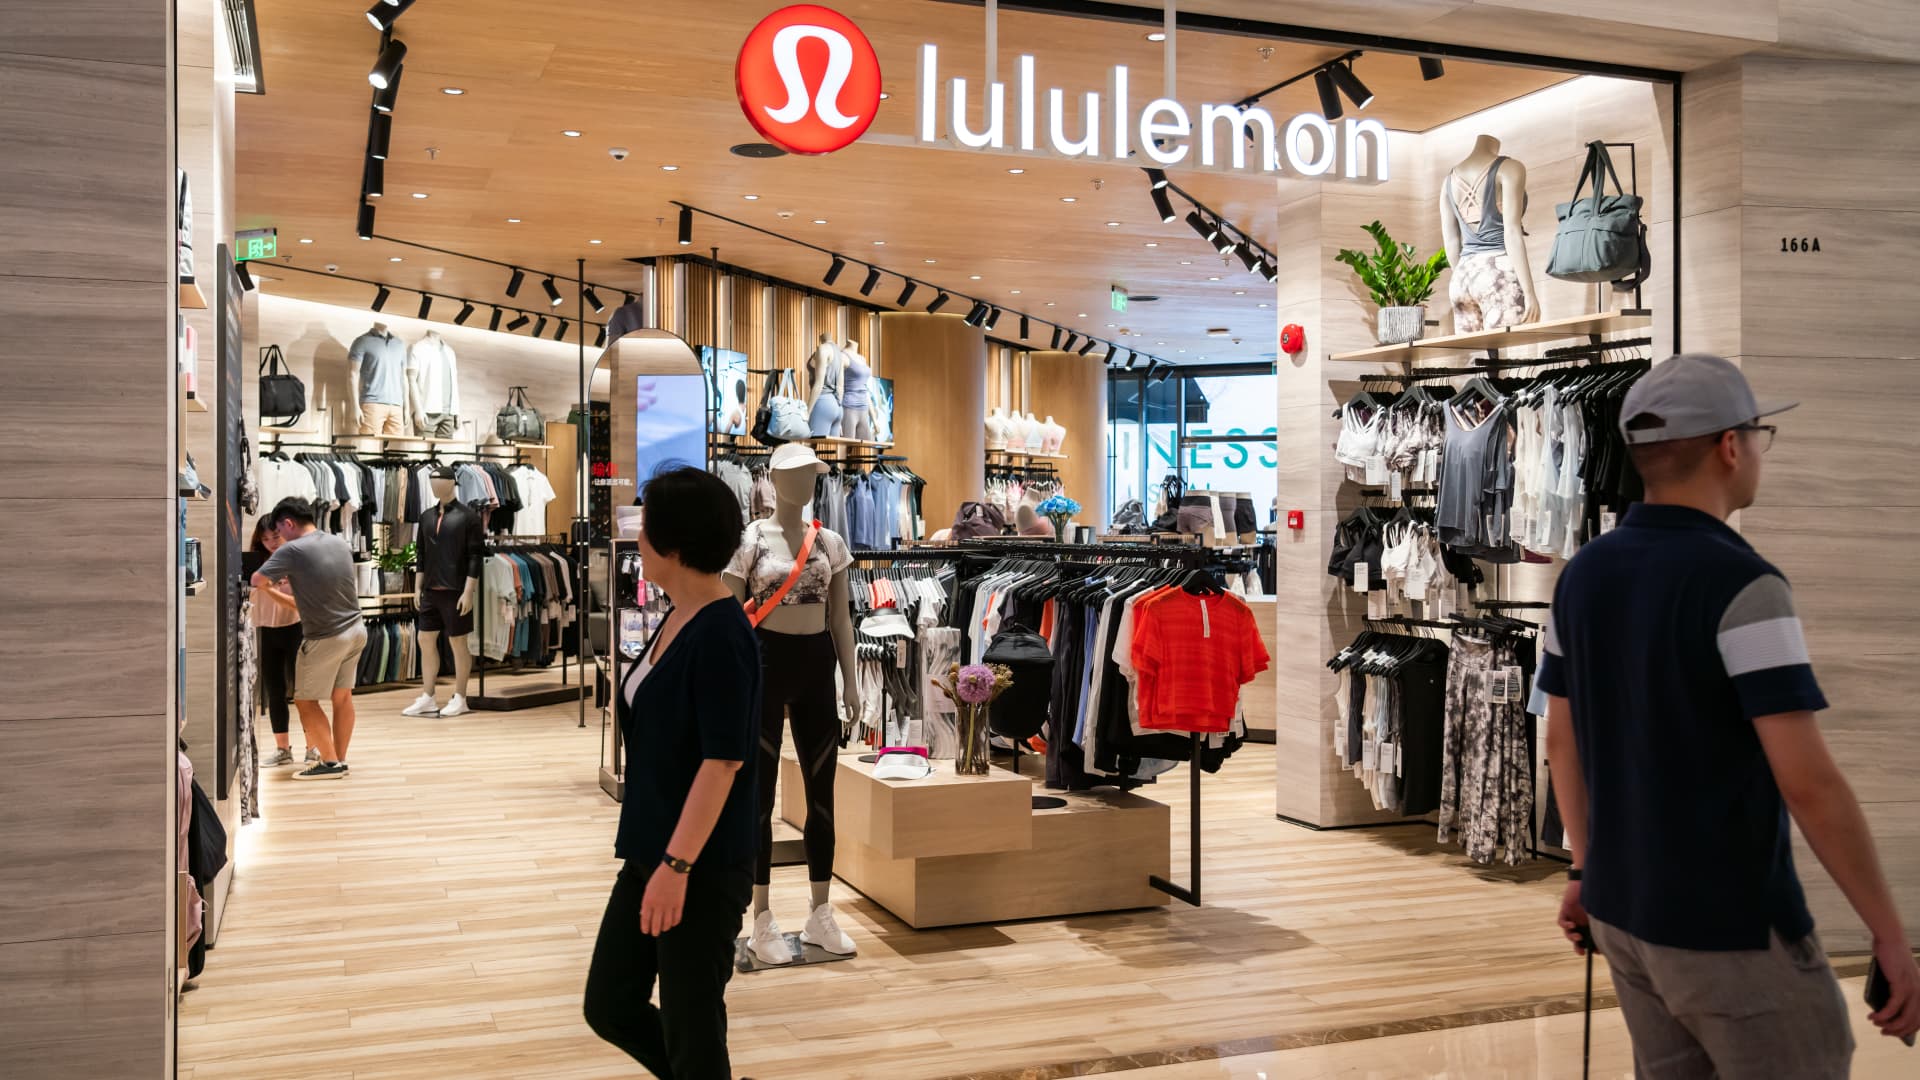 Lululemon raises guidance for the year as earnings and sales beat expectations